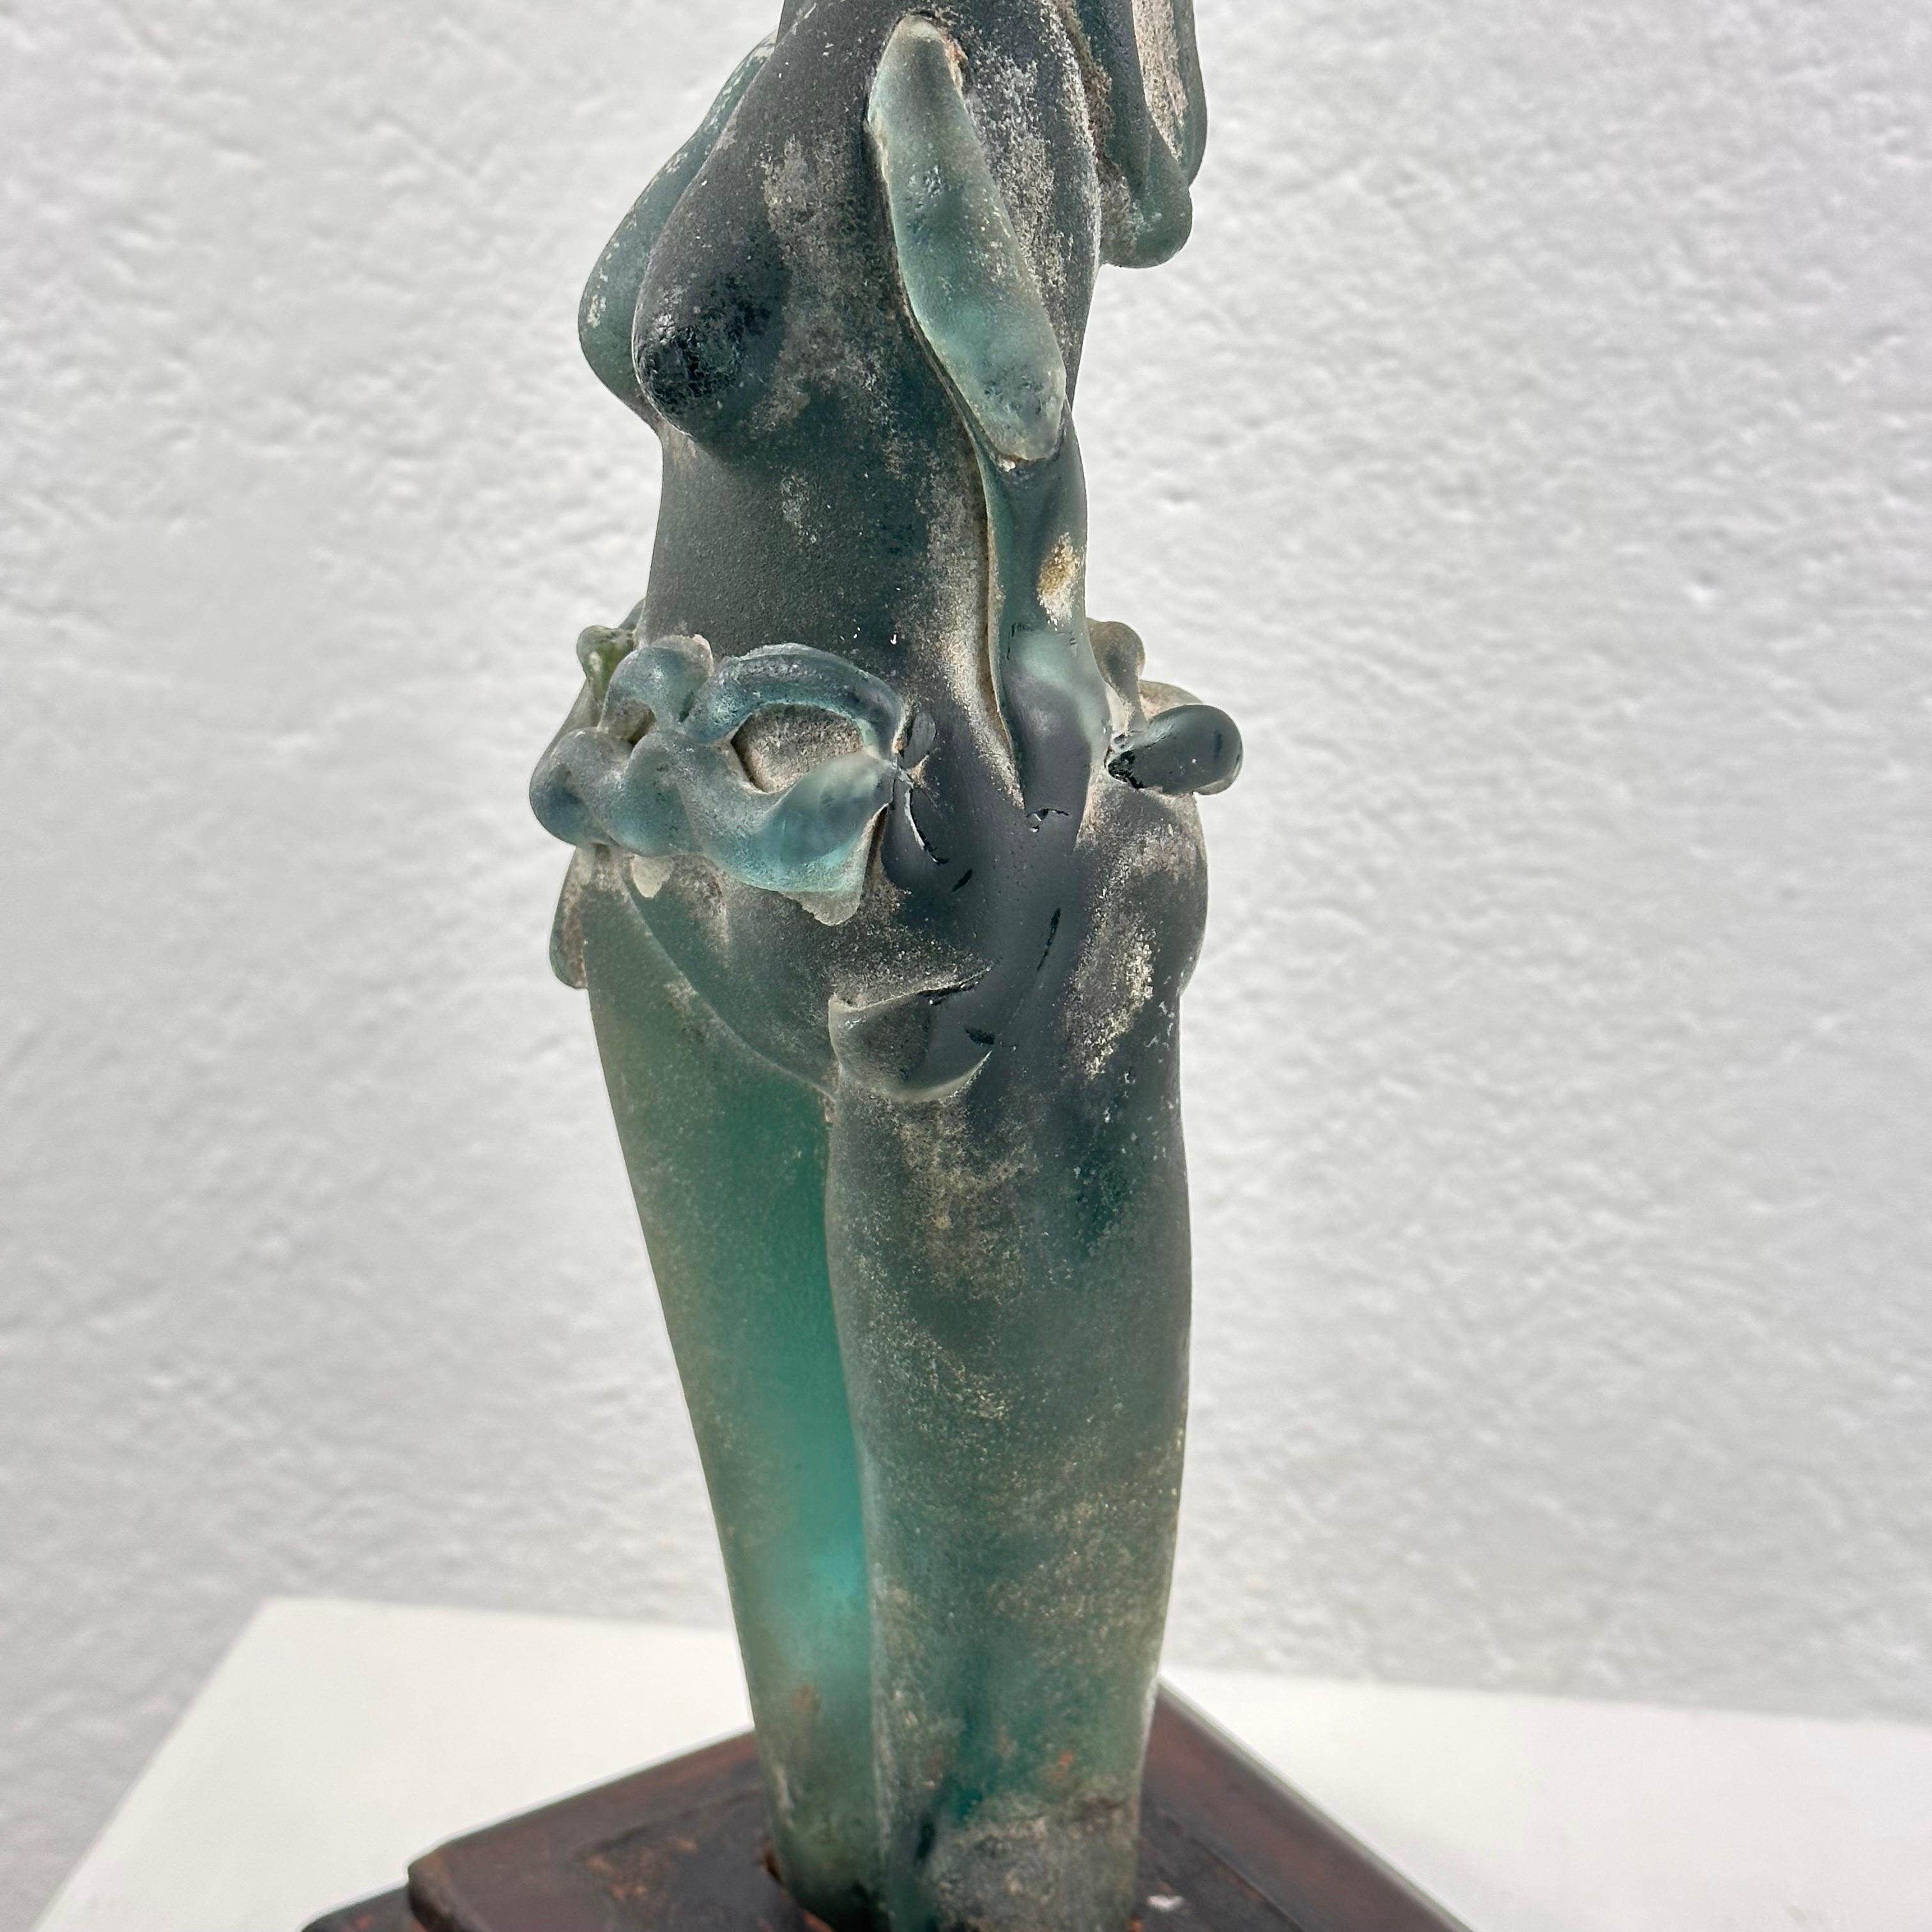 Very Rare Archimede Seguso Etched Murano Glass Woman's Sculpture, 1930s For Sale 6